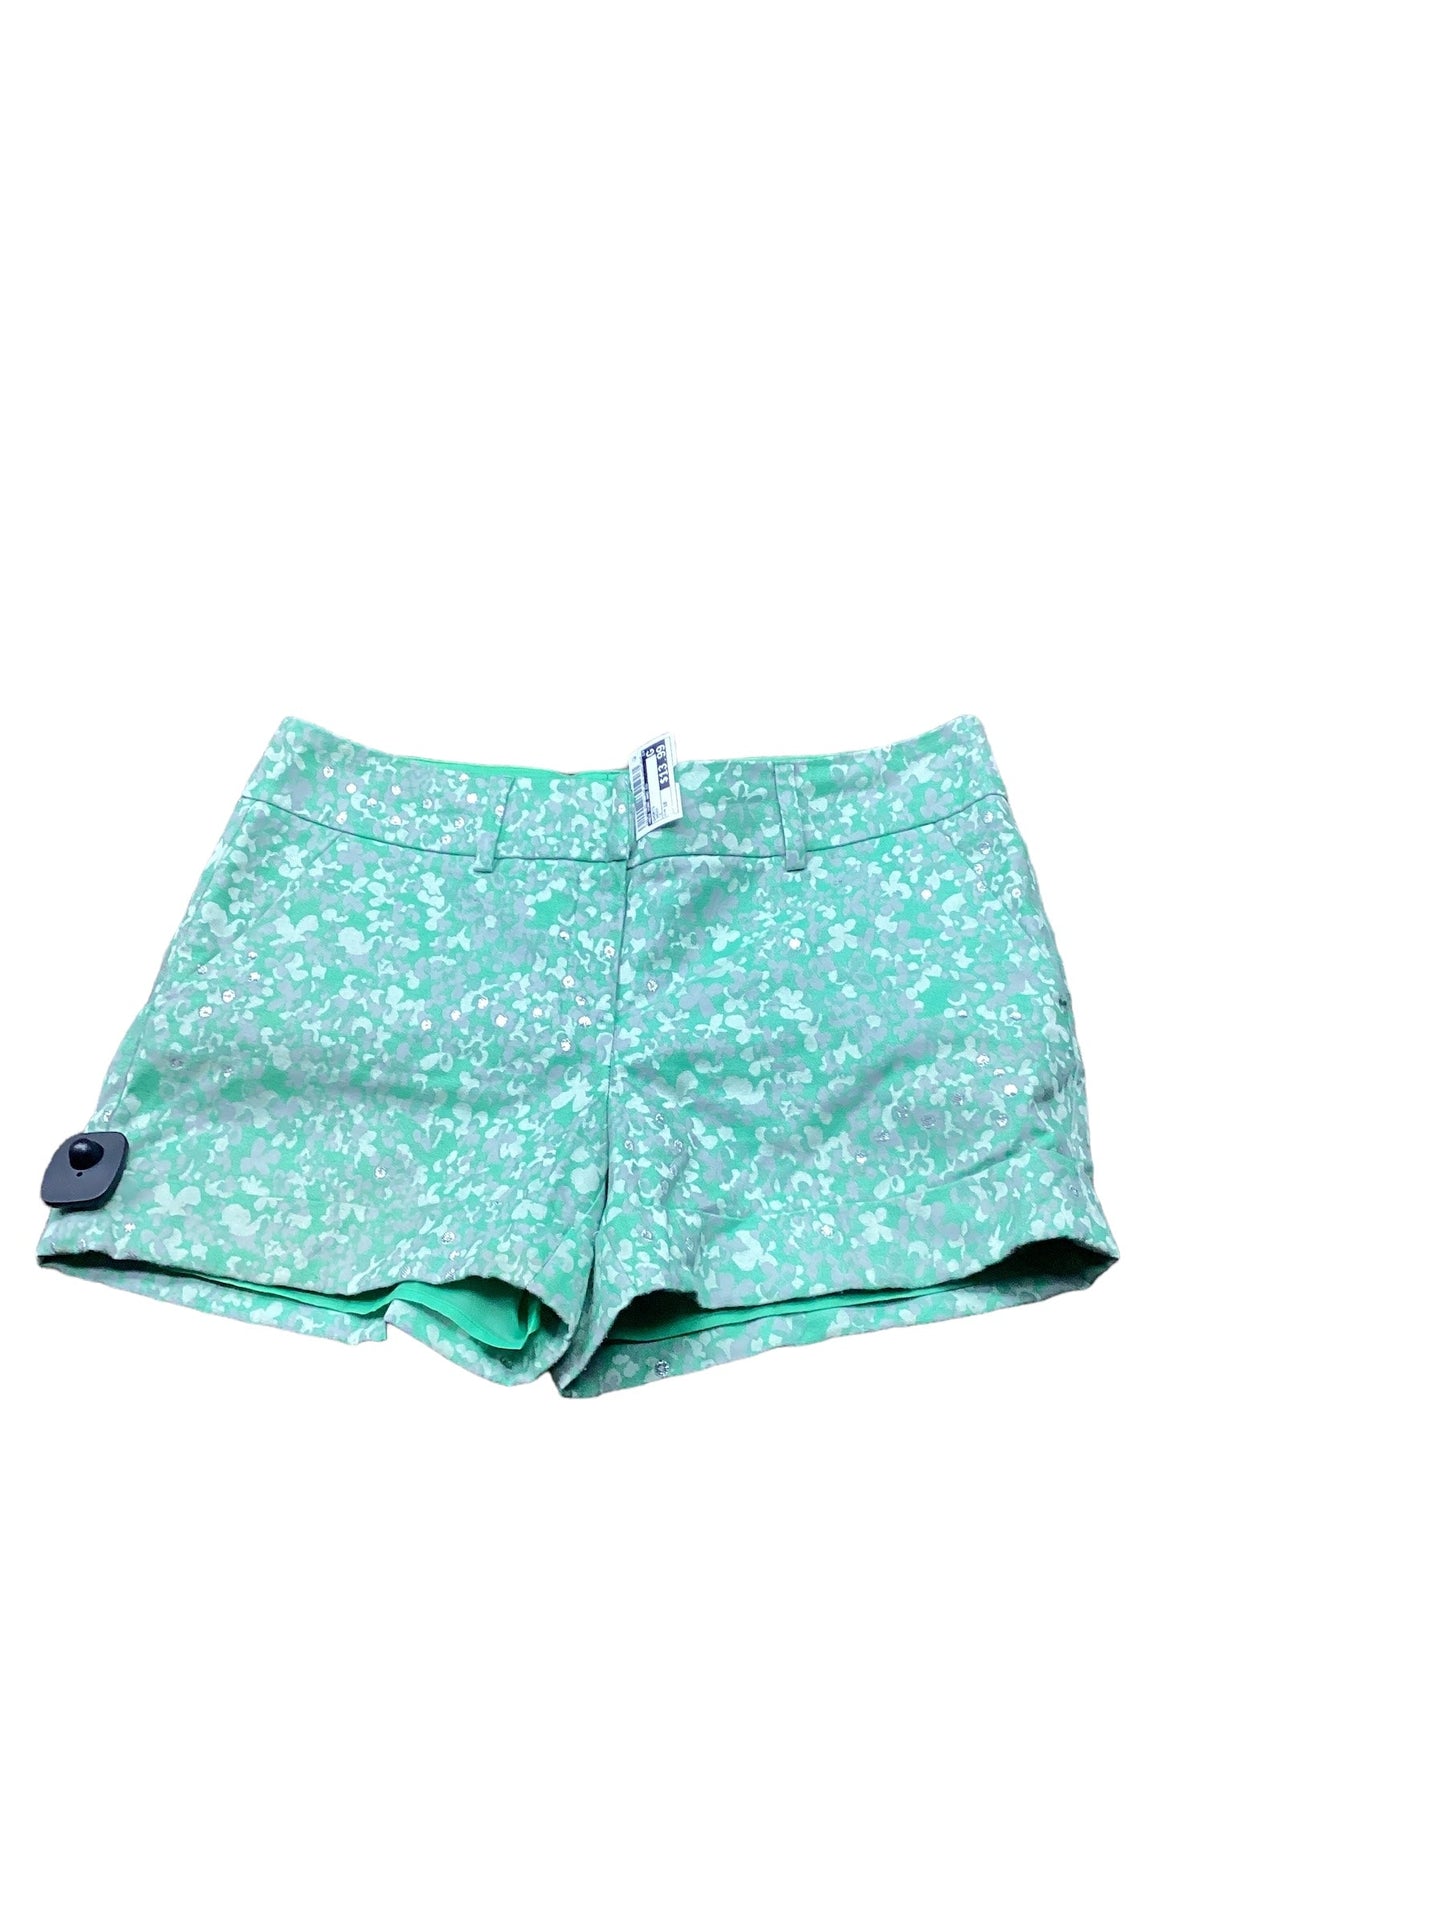 Green Shorts New York And Co, Size 10